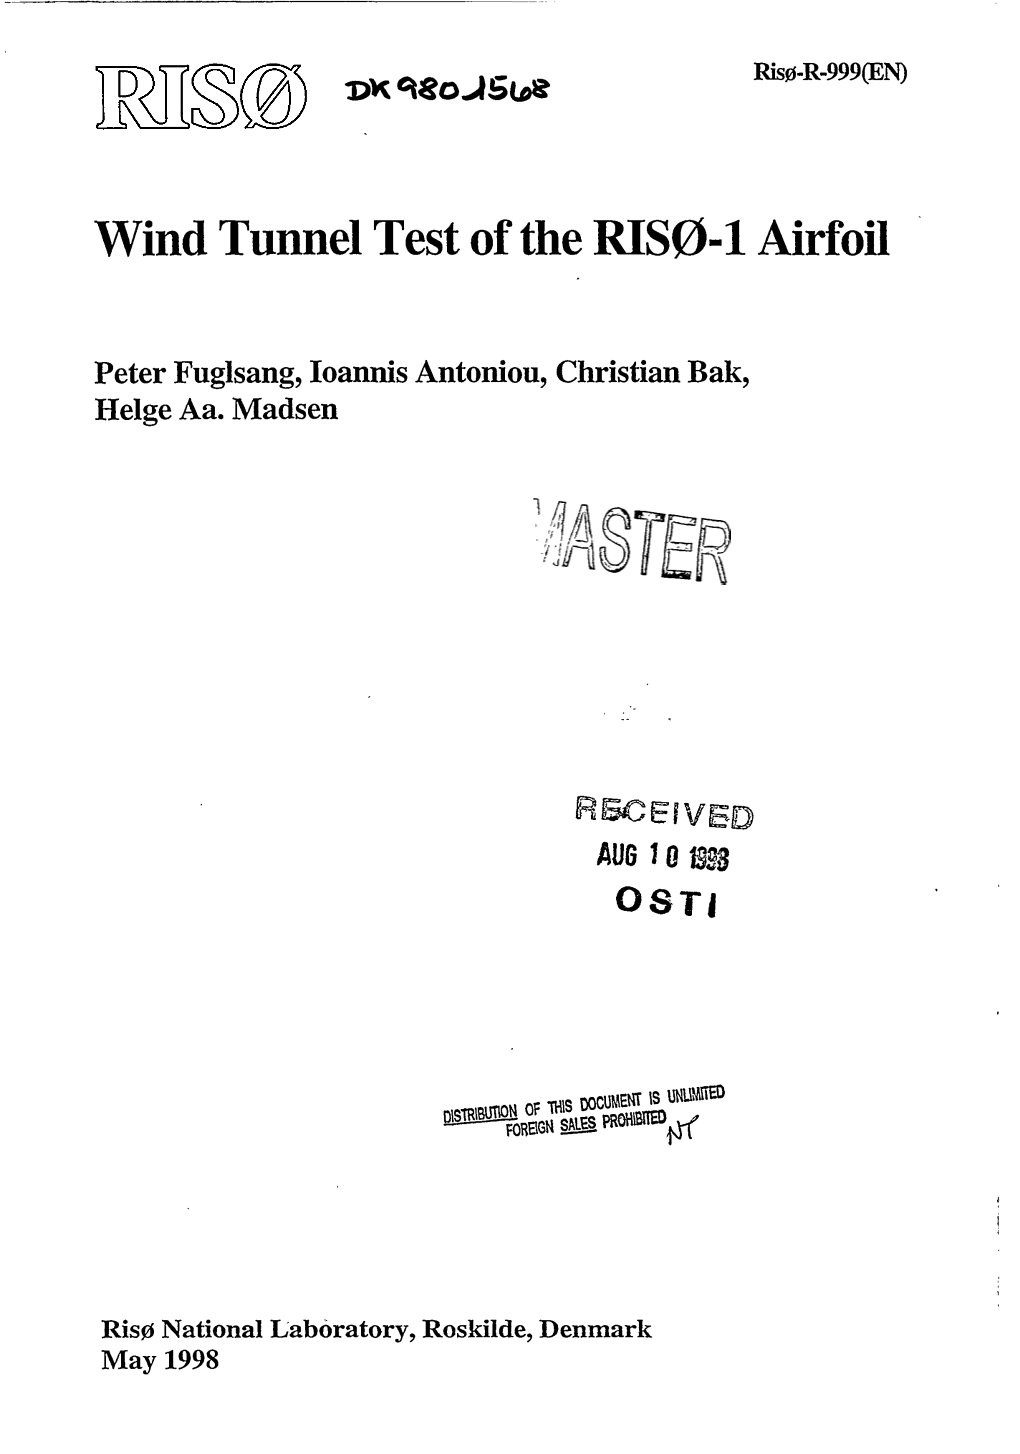 Wind Tunnel Test of the RIS0-1 Airfoil